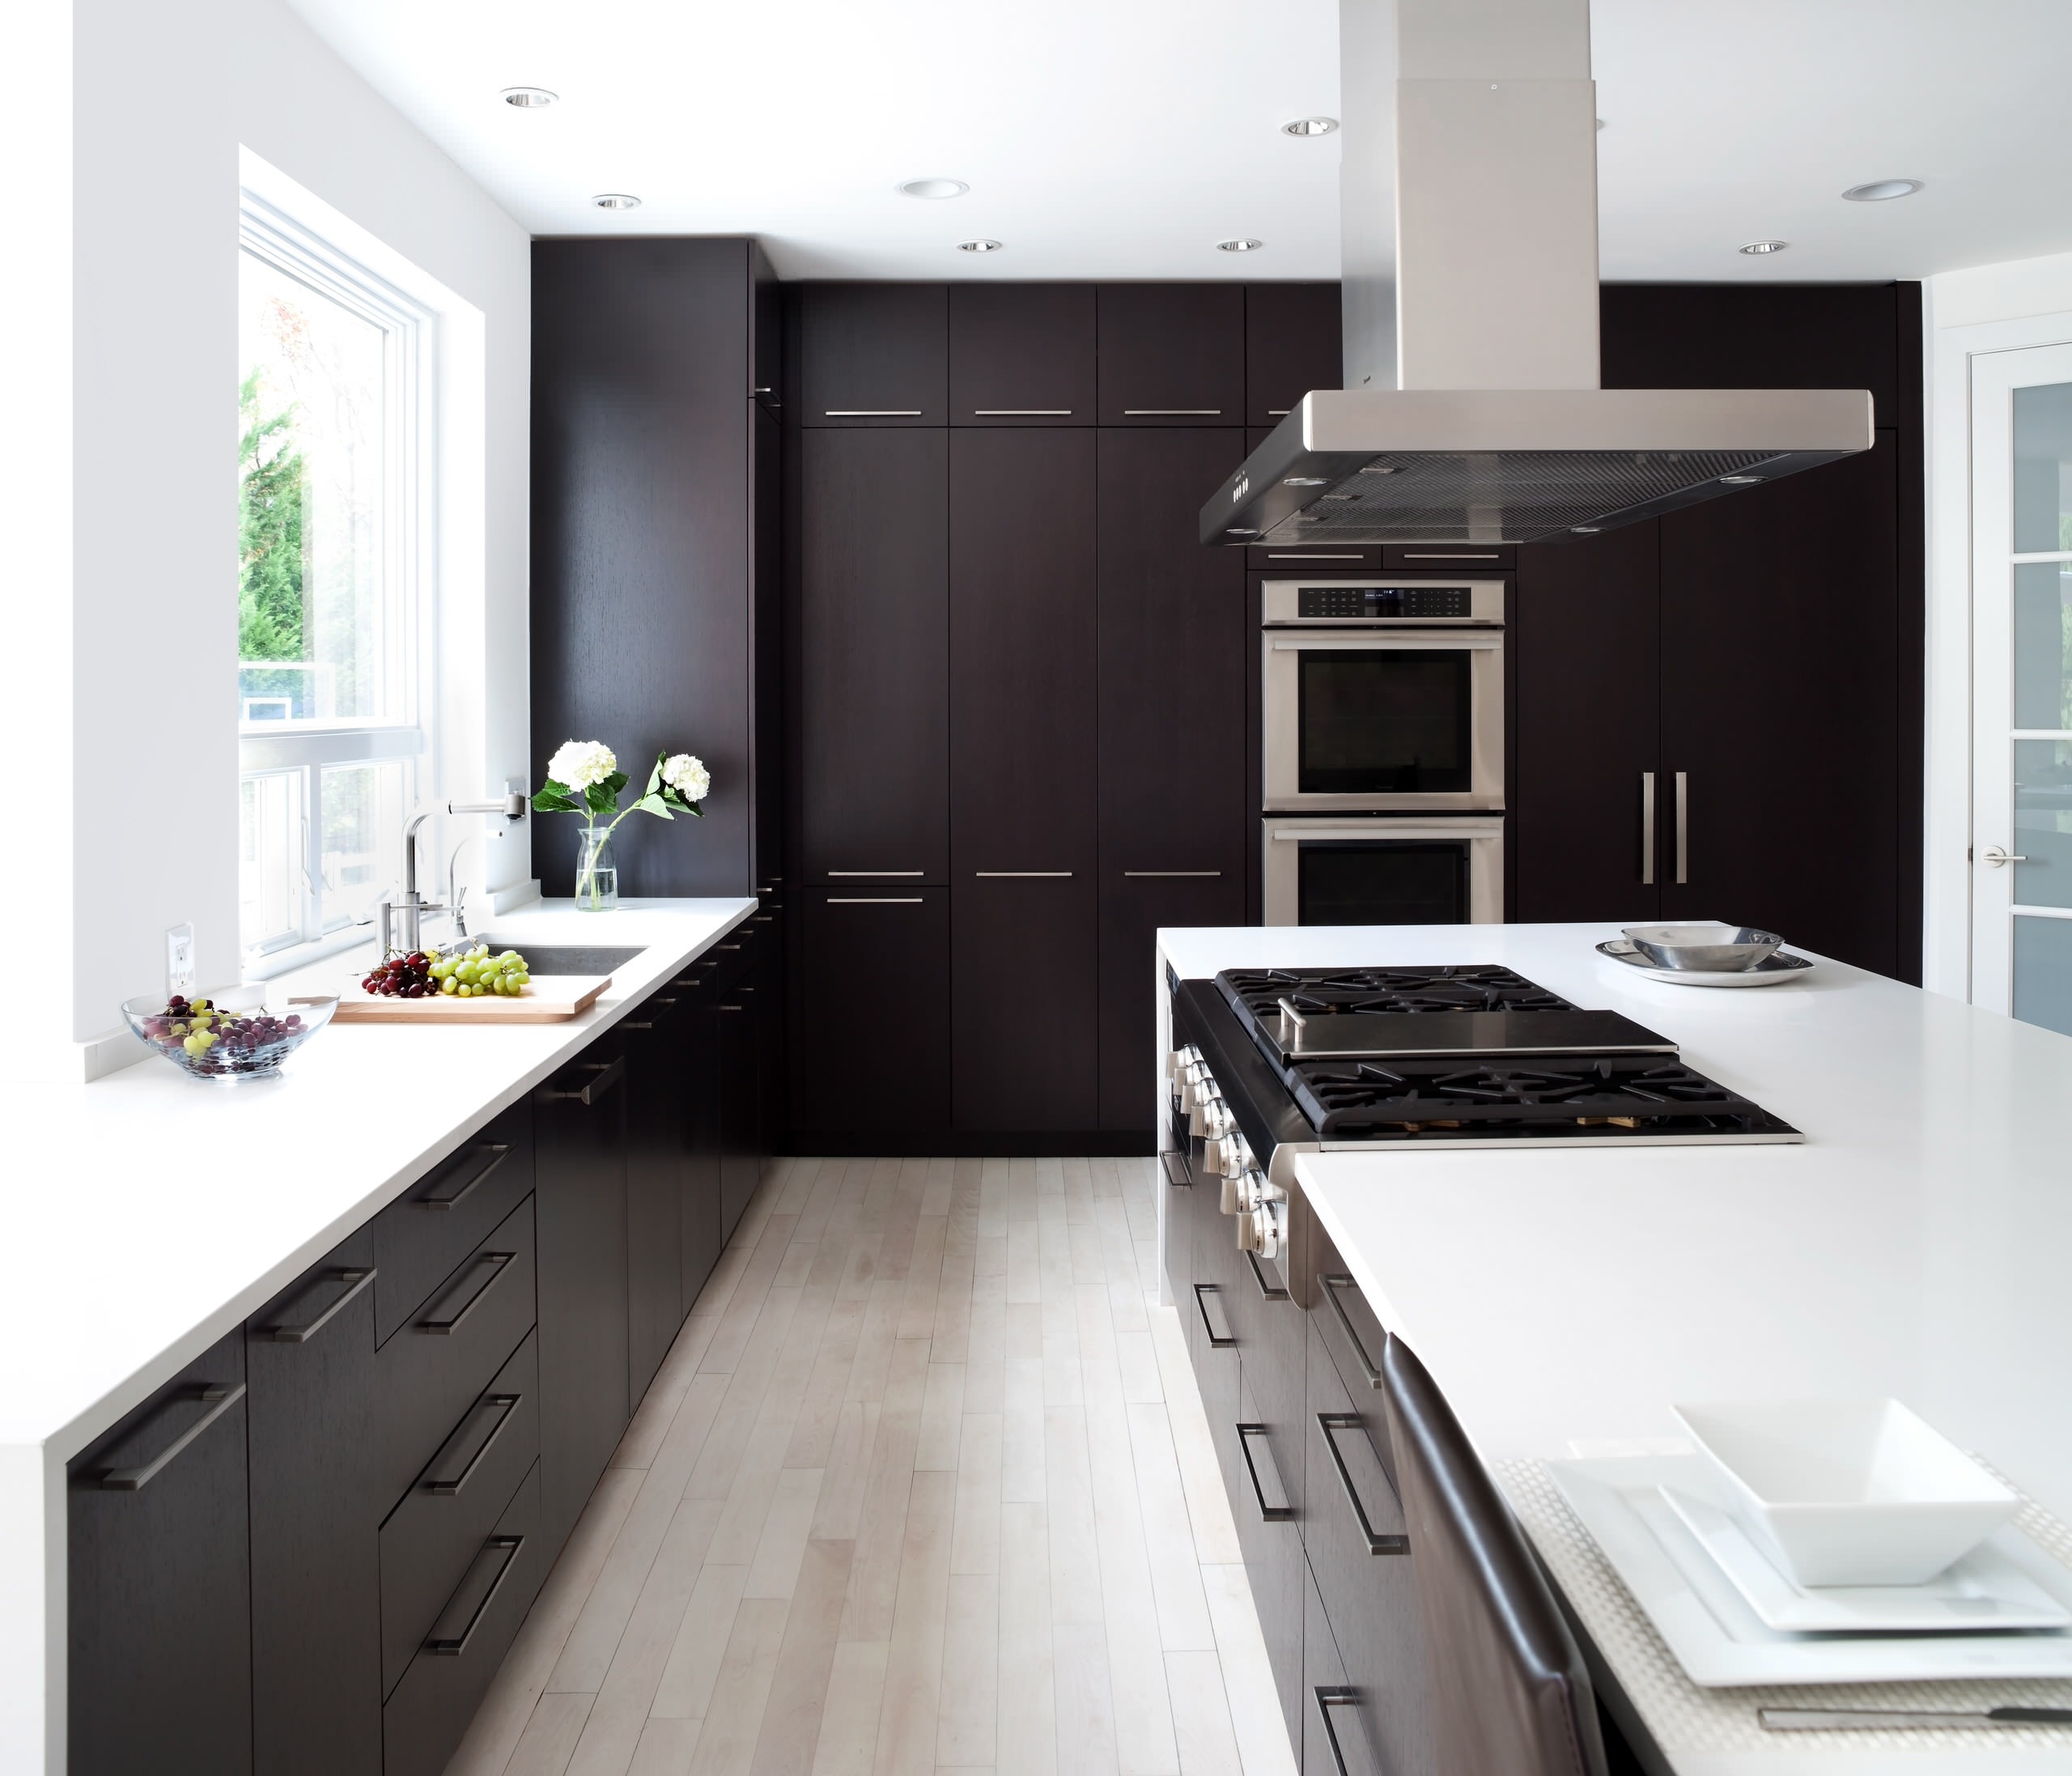 Floor To Ceiling Cabinets Houzz